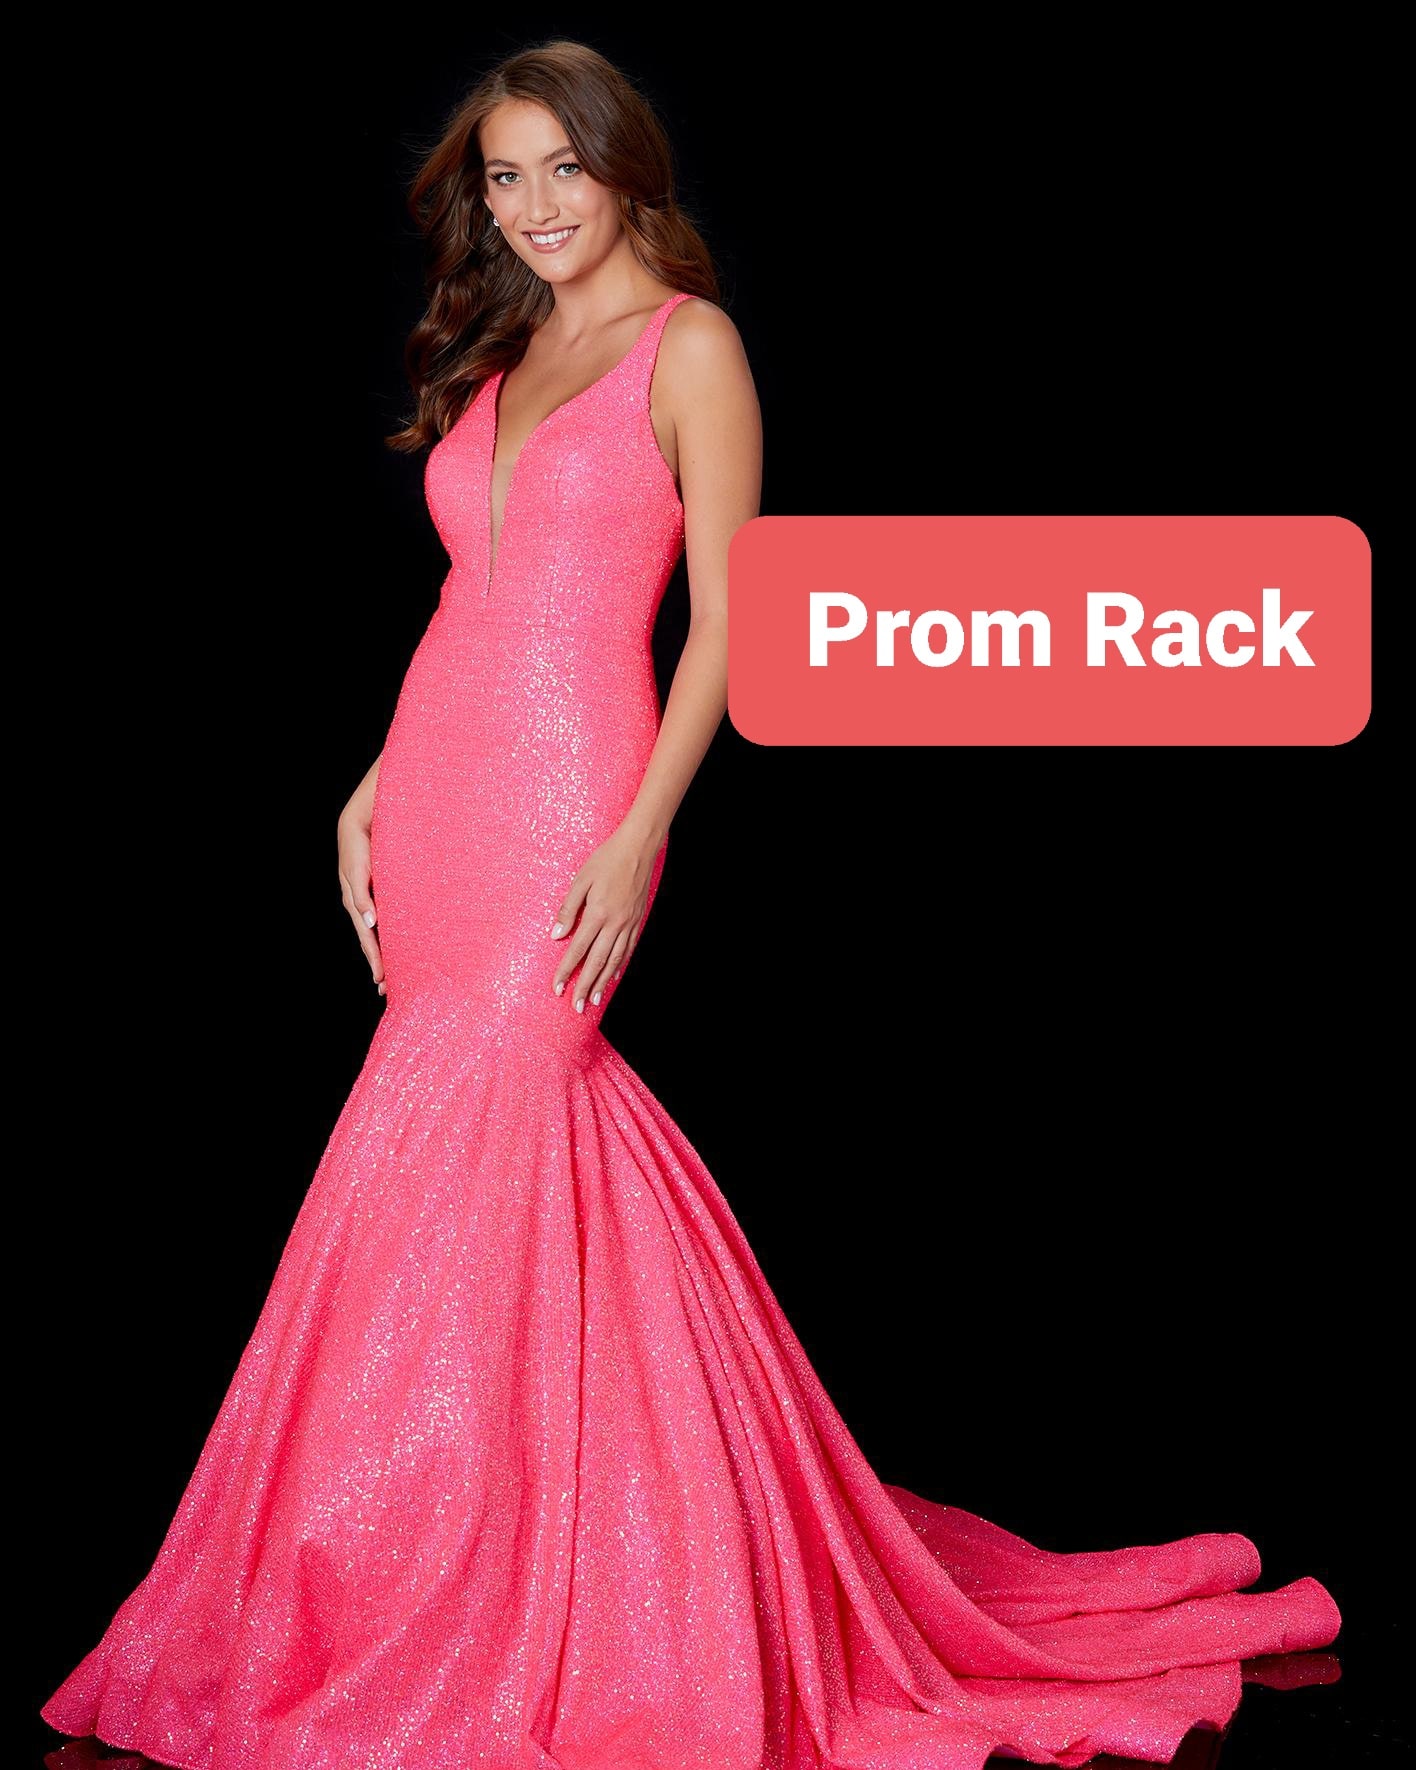 Visit Prom Rack for your Prom Dress!